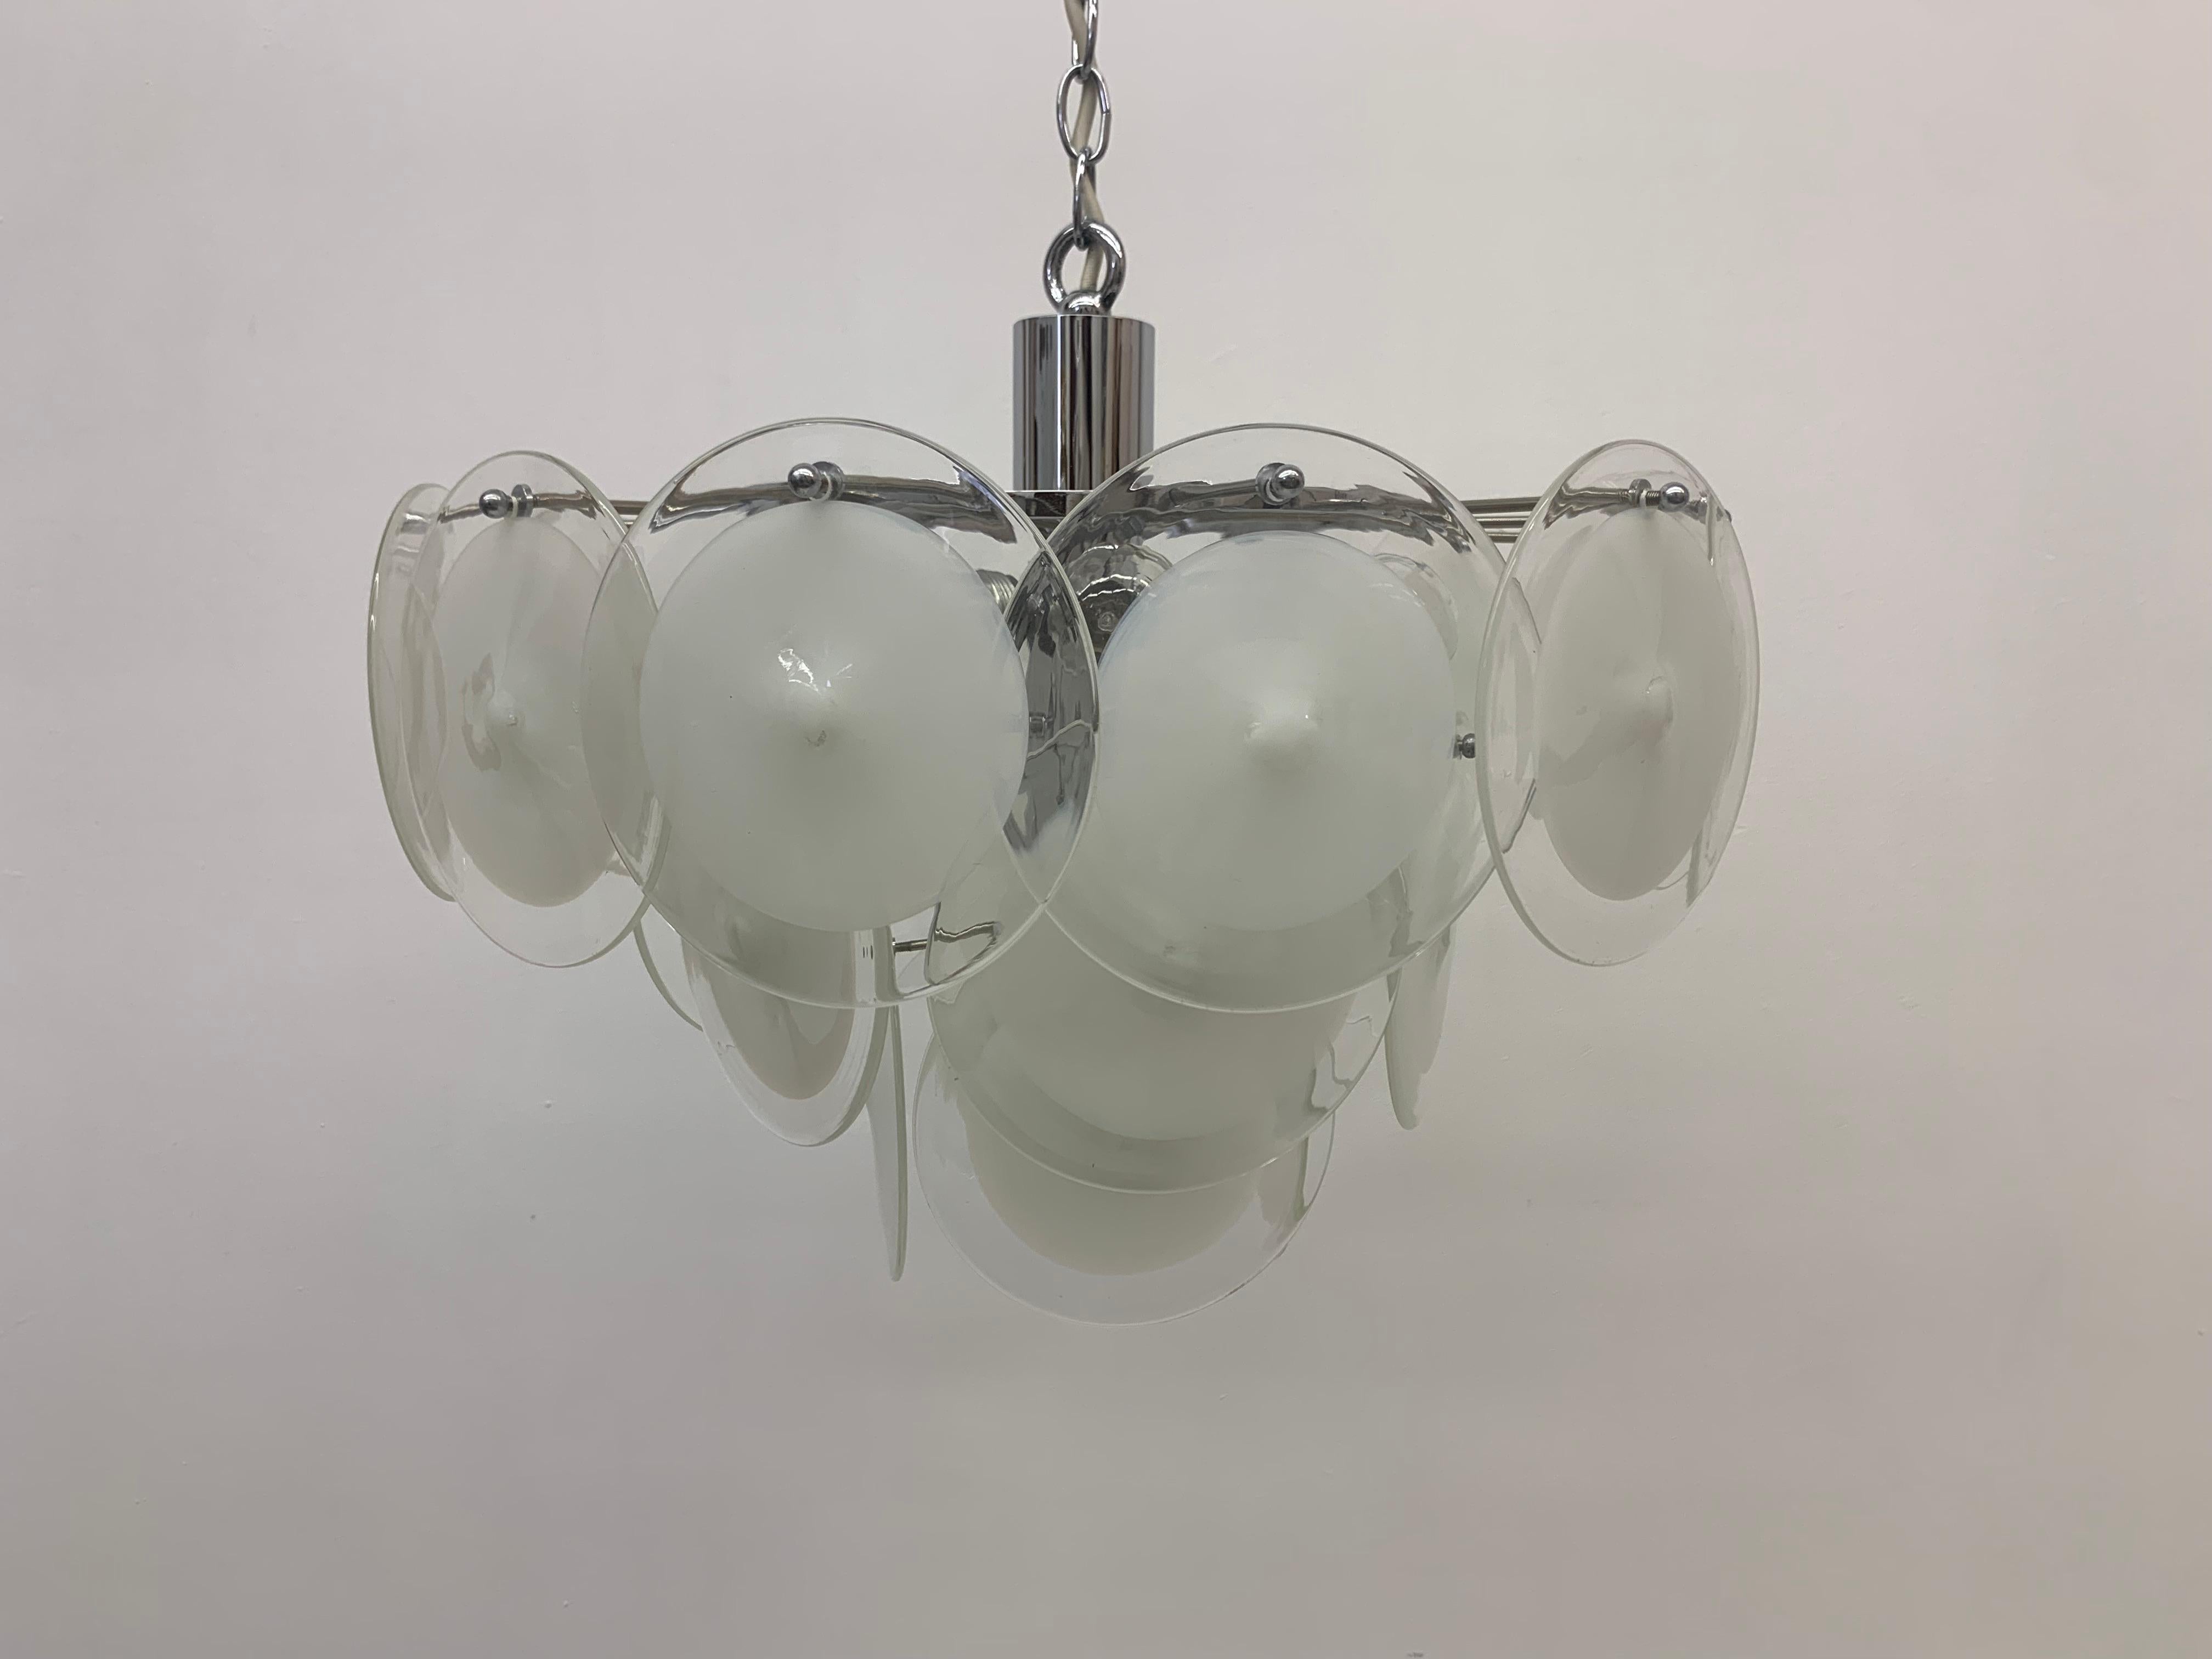 Italian Disc Chandelier by Vistosi Murano Glass, Italy, 1970s For Sale 7